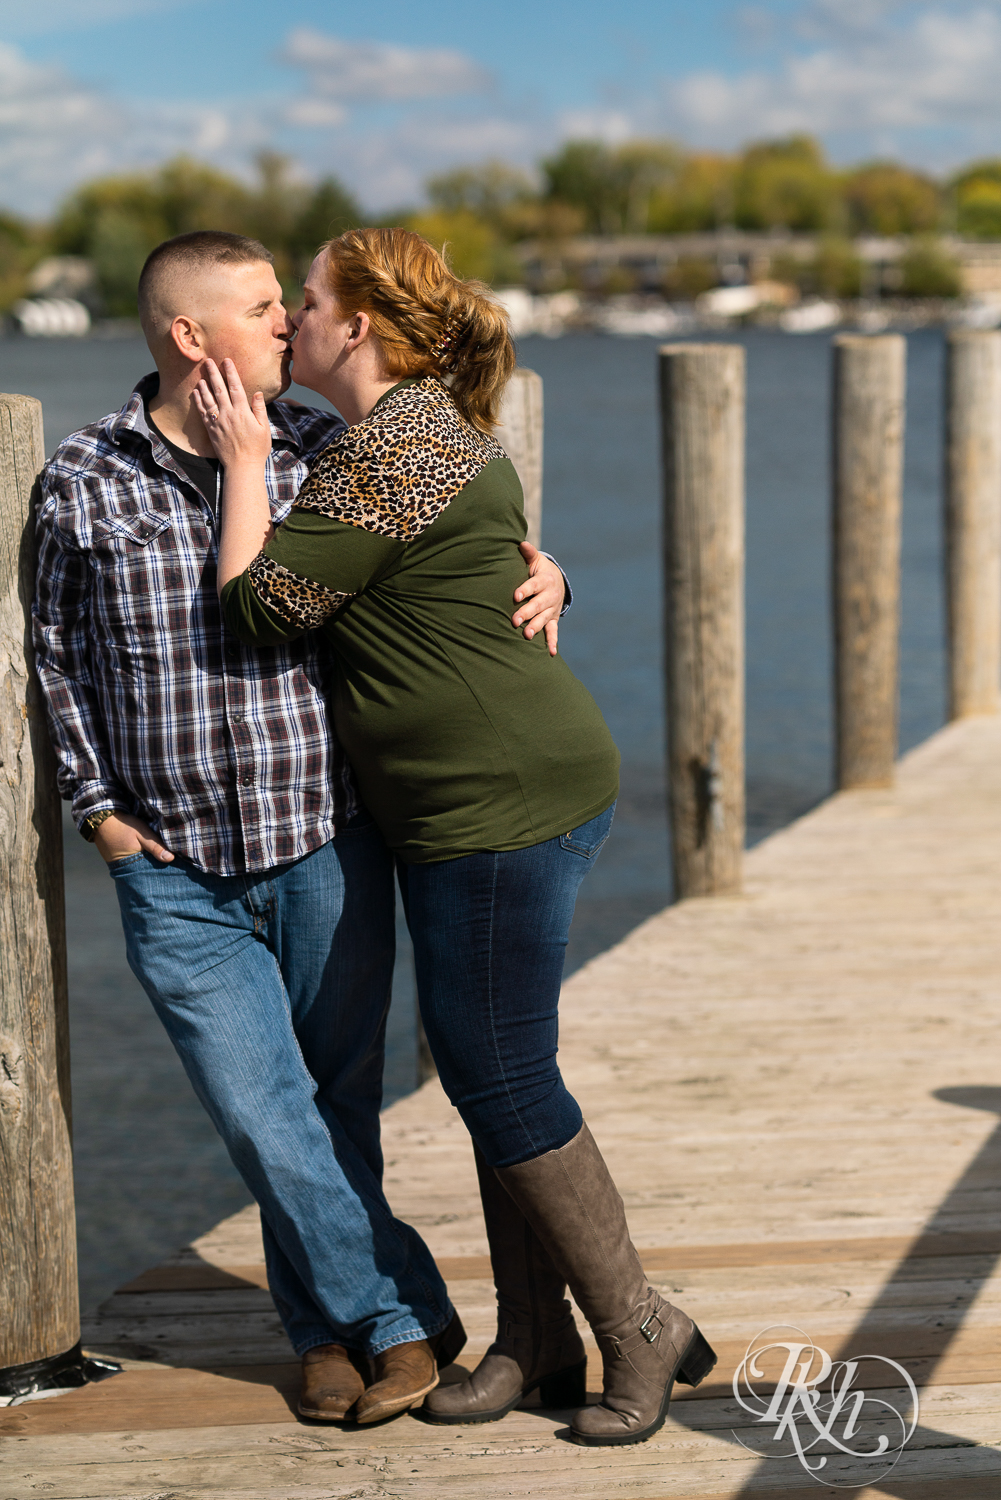 Man in flannel and jeans kisses woman in sweater and jeans on a dock in Excelsior, Minnesota.